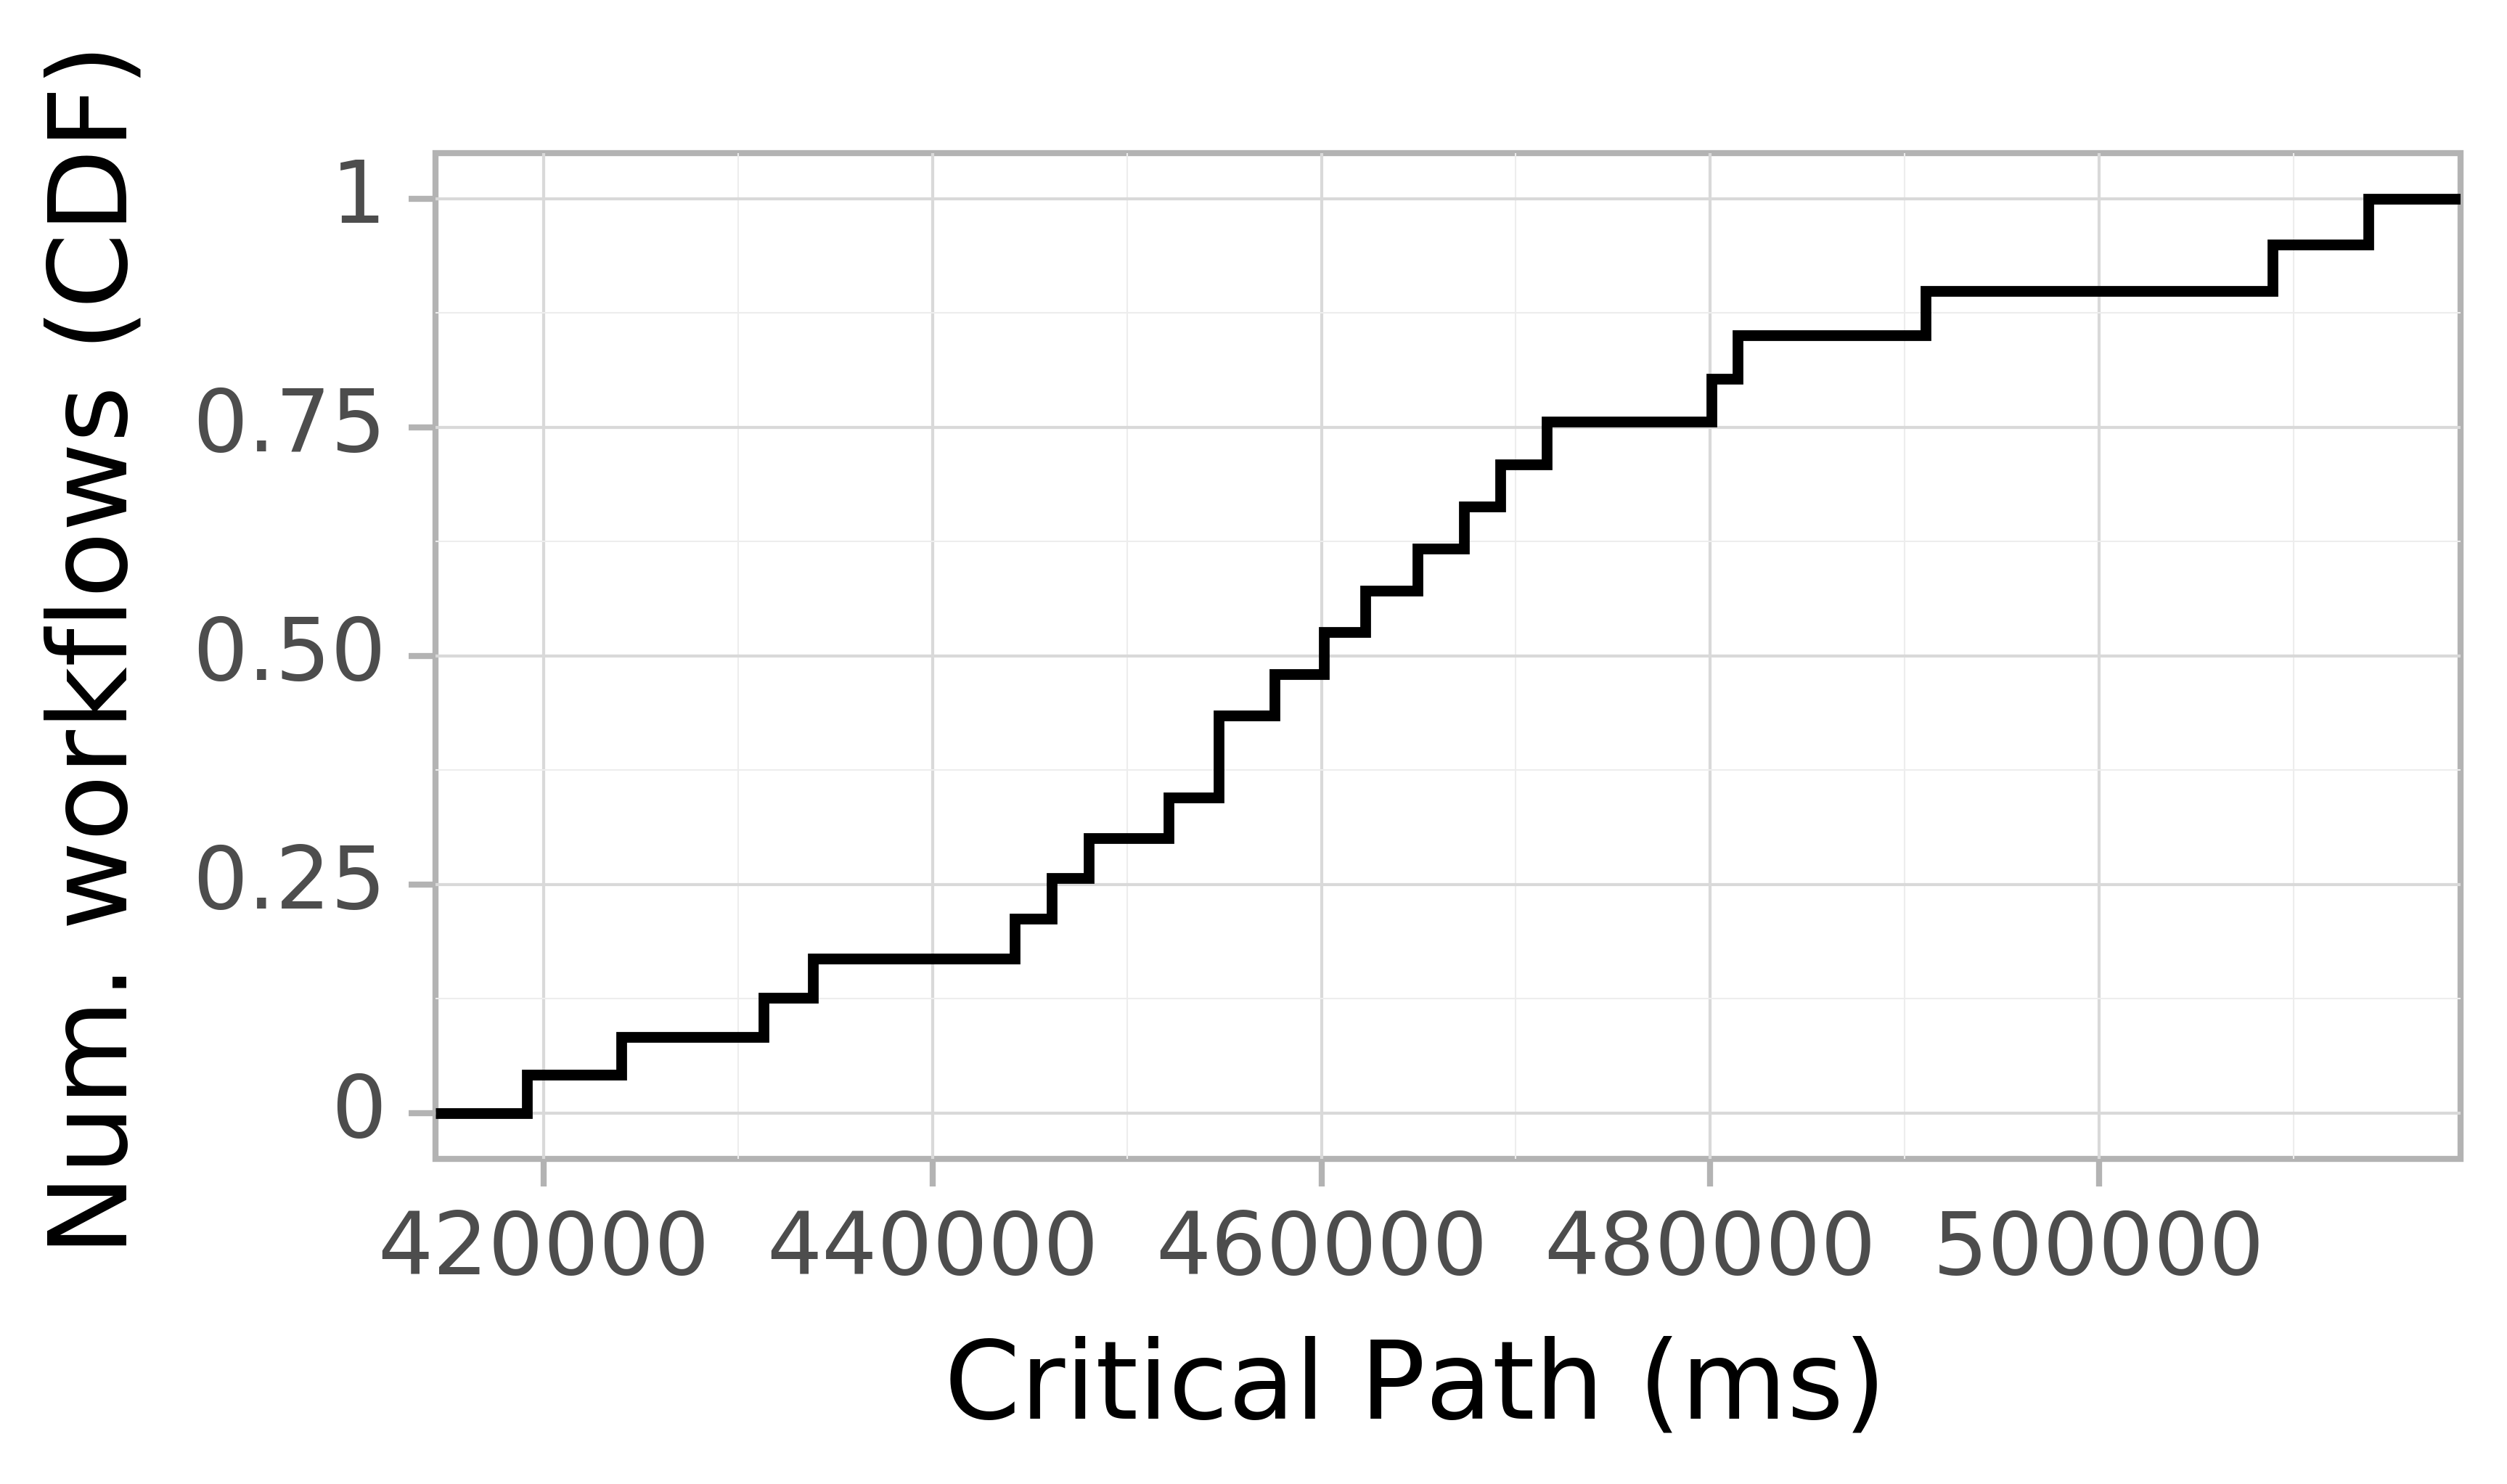 Job runtime CDF graph for the askalon-new_ee26 trace.